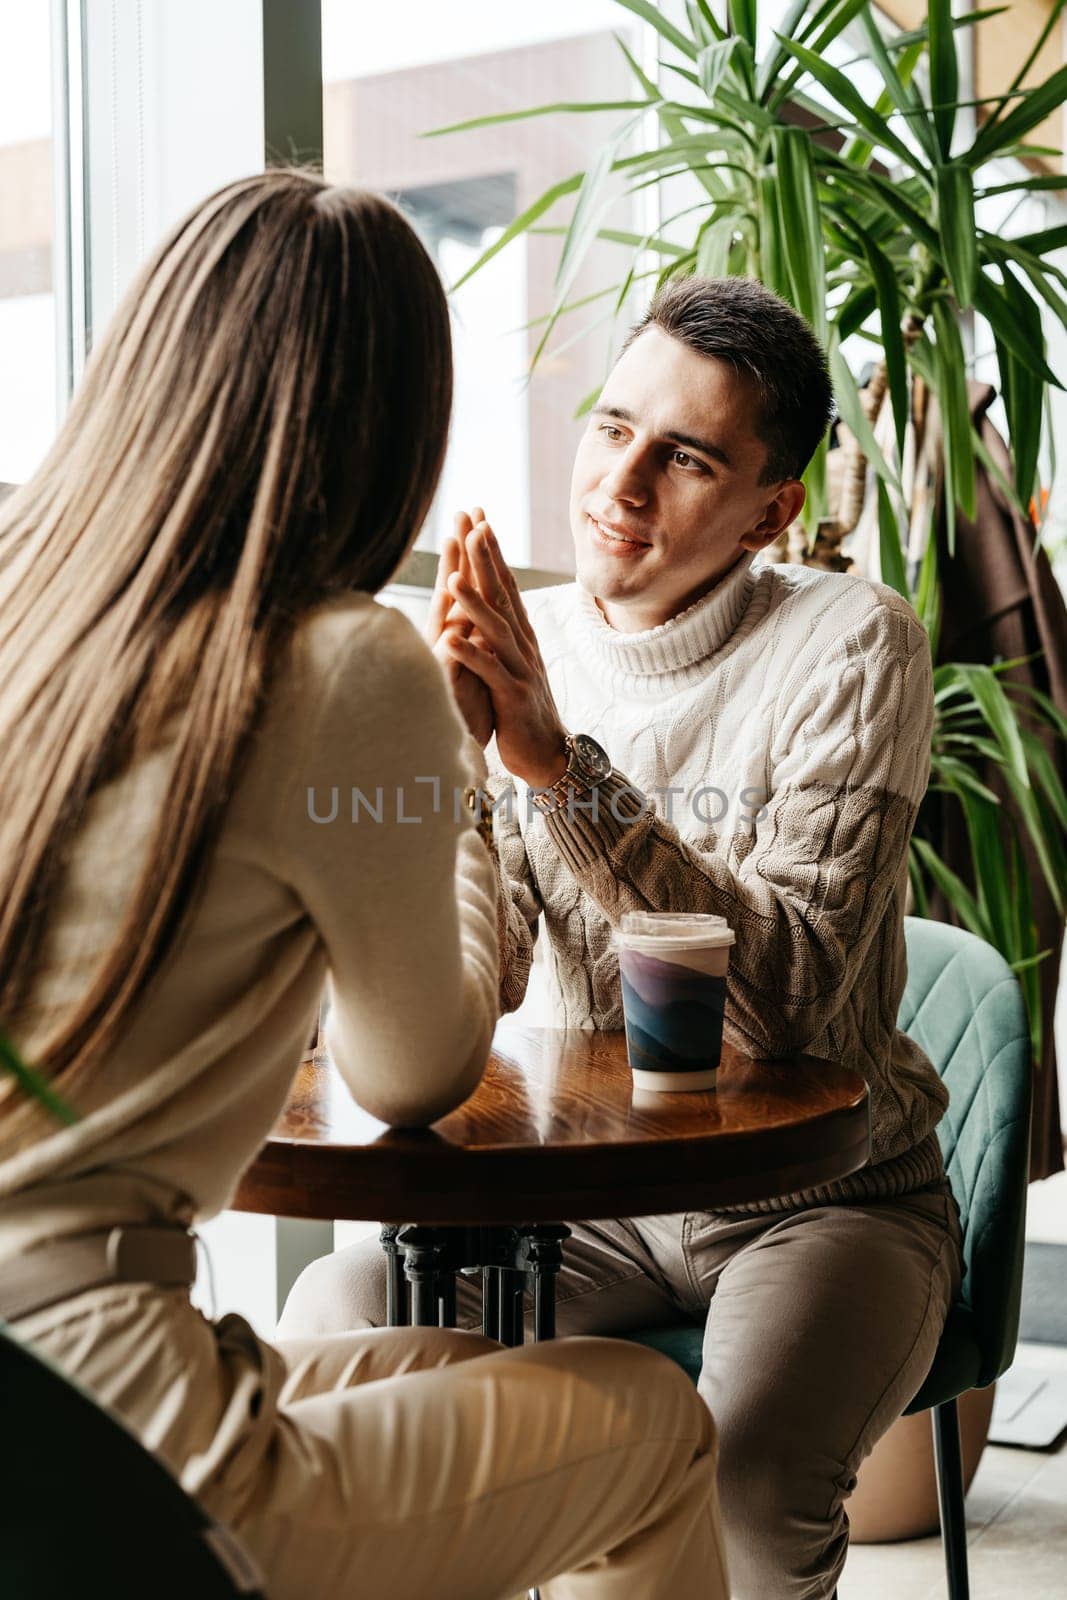 Couple Engaged in Conversation at a Cozy Cafe During Daytime by Fabrikasimf